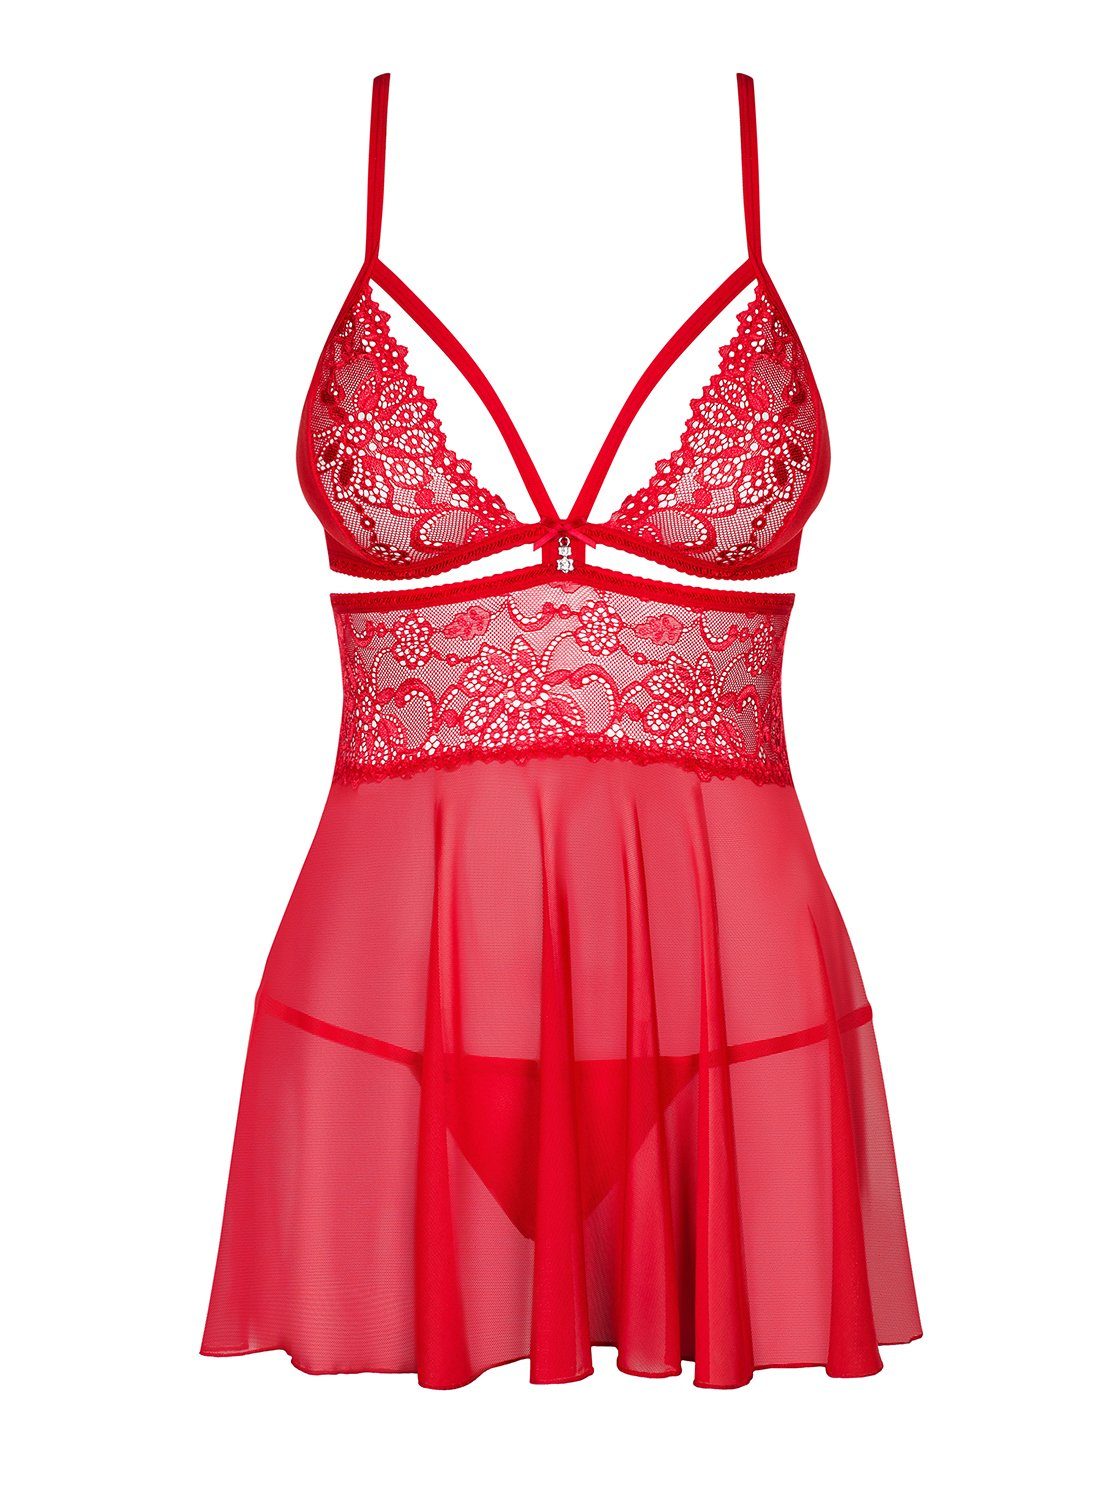 Chemise Obsessive String Babydoll mit (2-tlg) Negligee Dessous Negligé rot